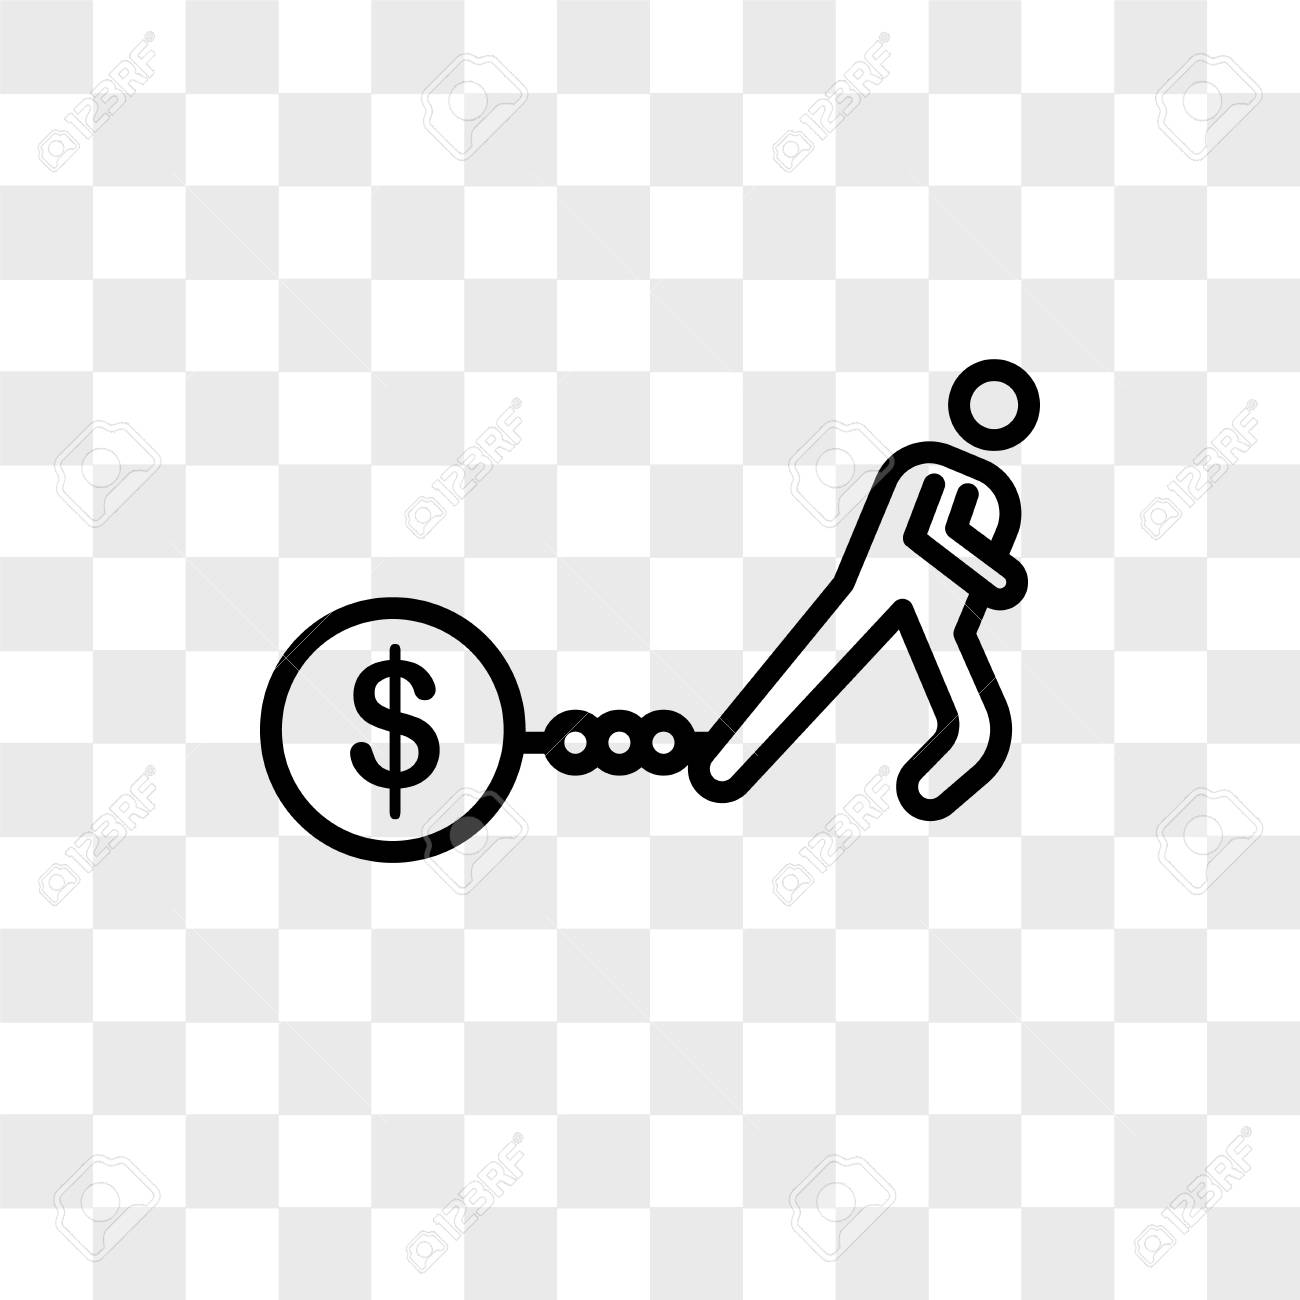 Debt Vector Icon Isolated On Transparent Background Logo